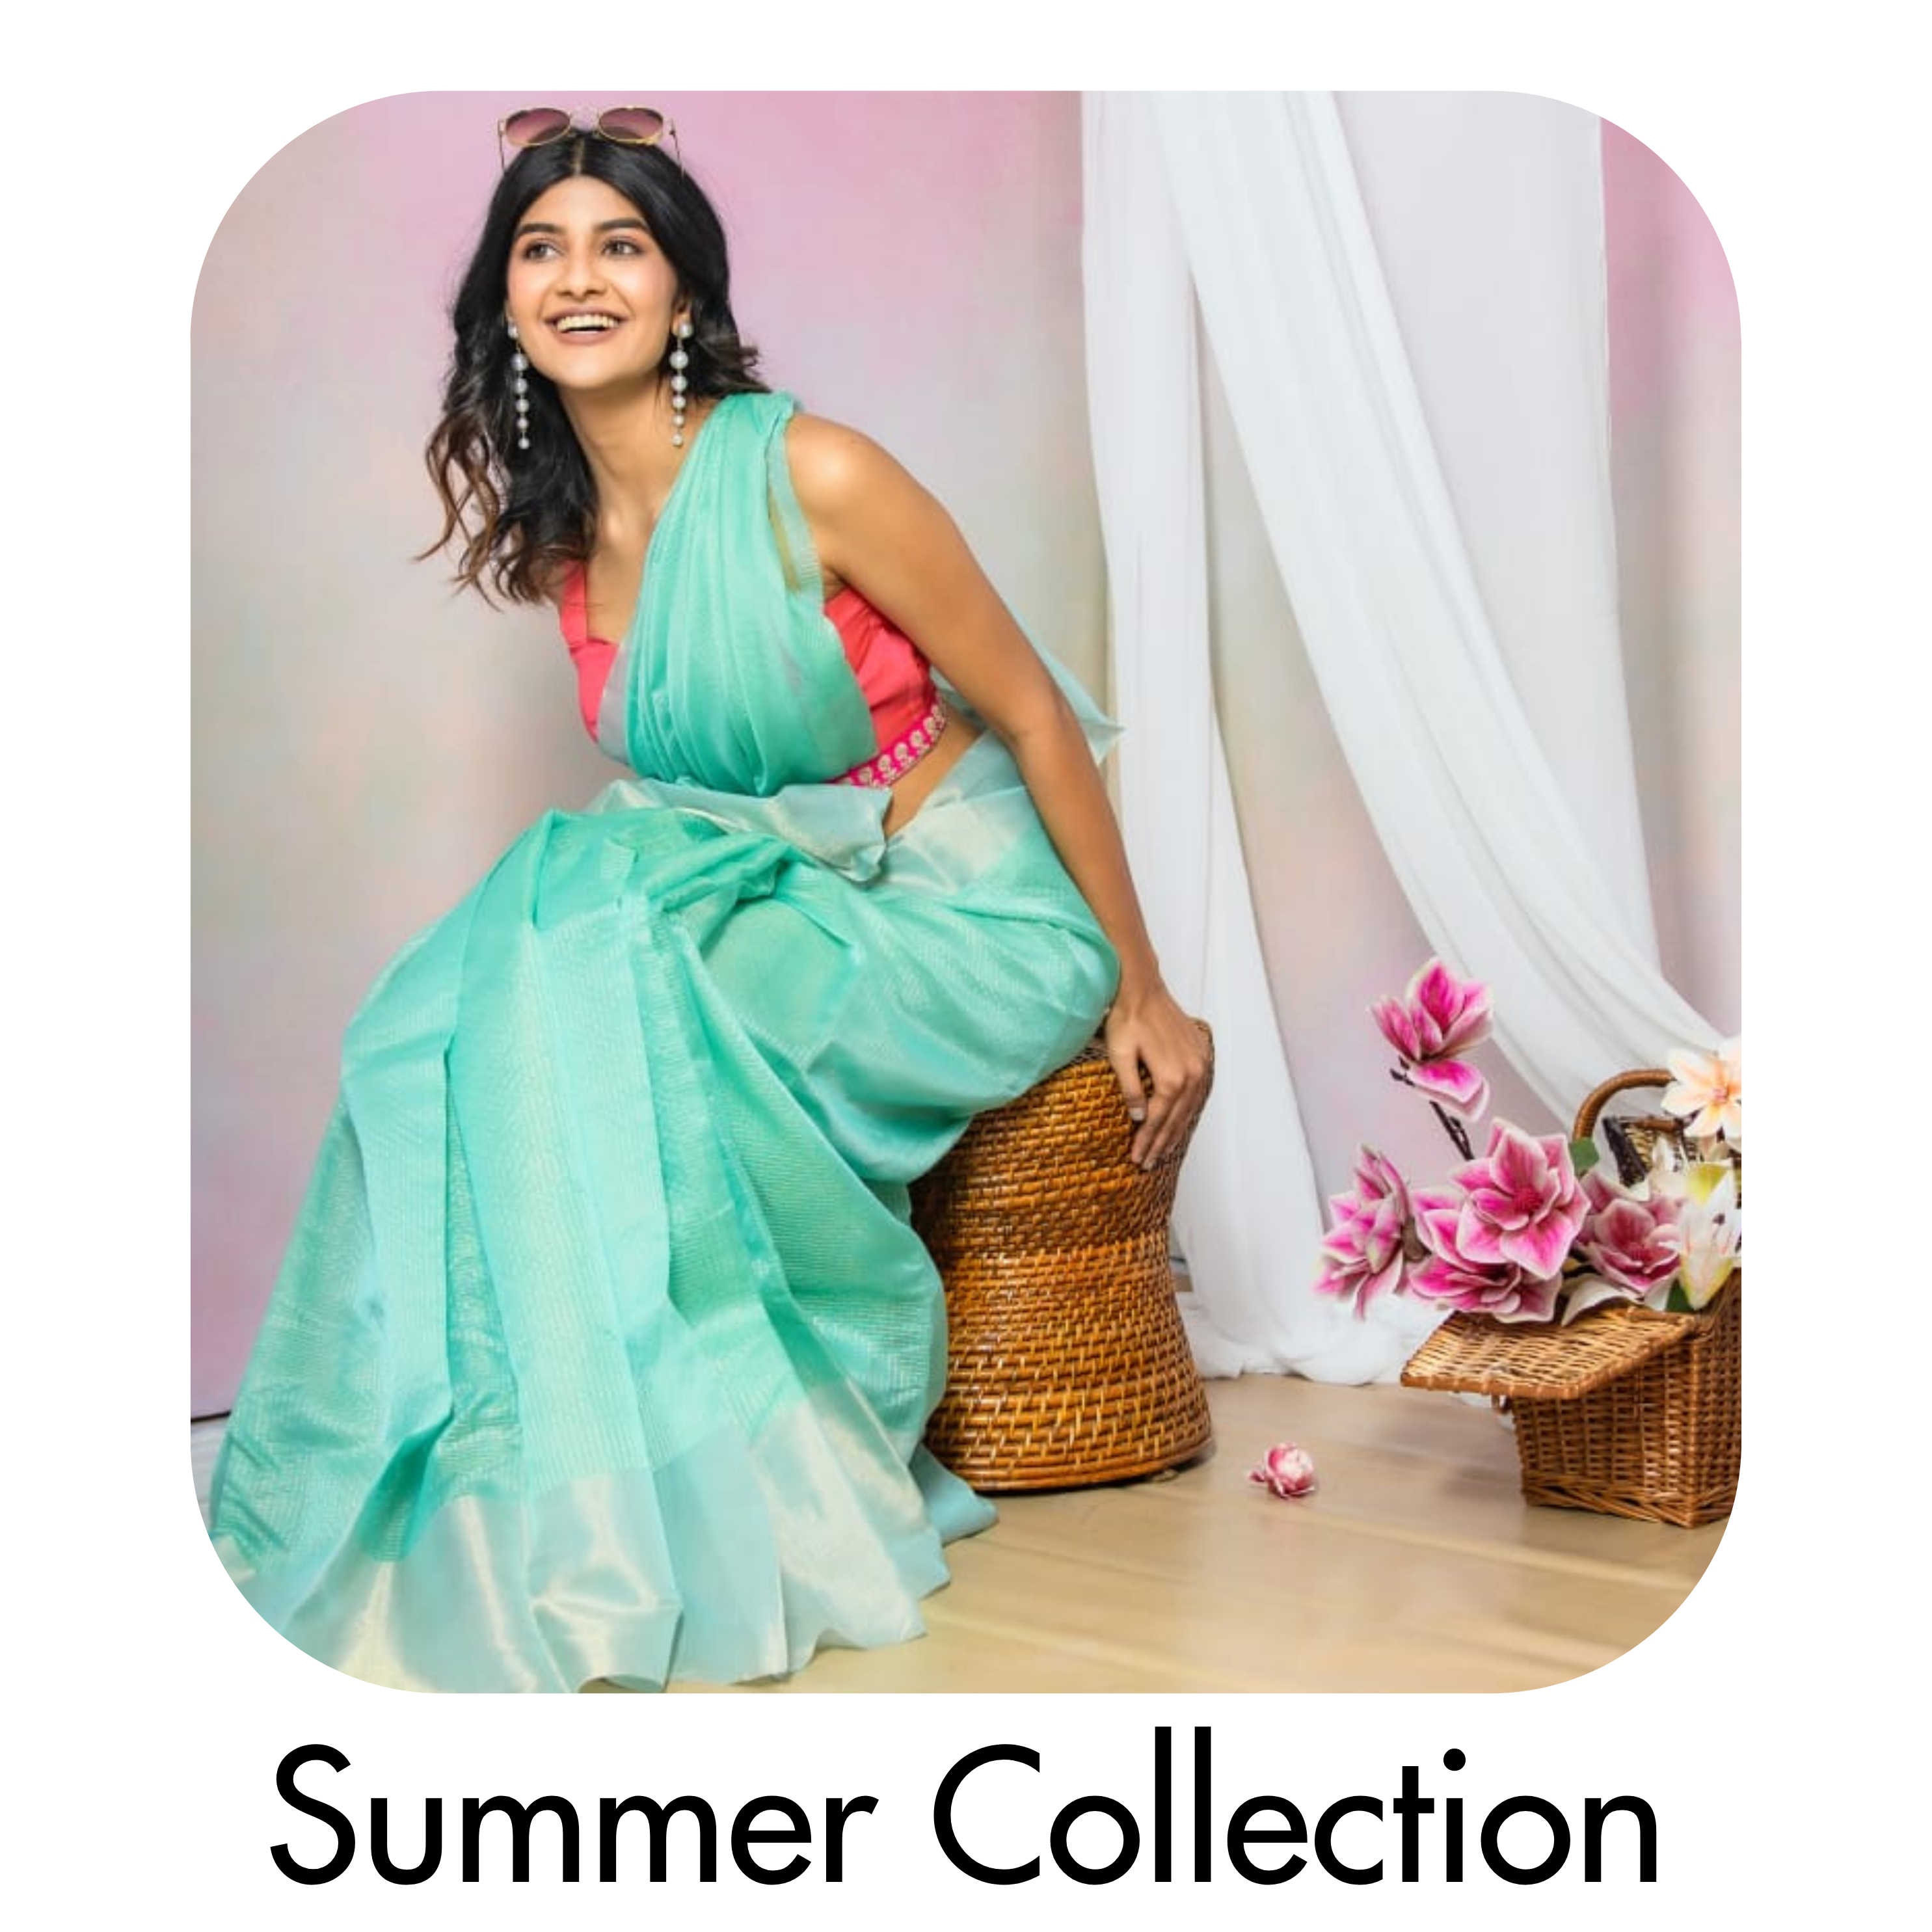 Summer collections